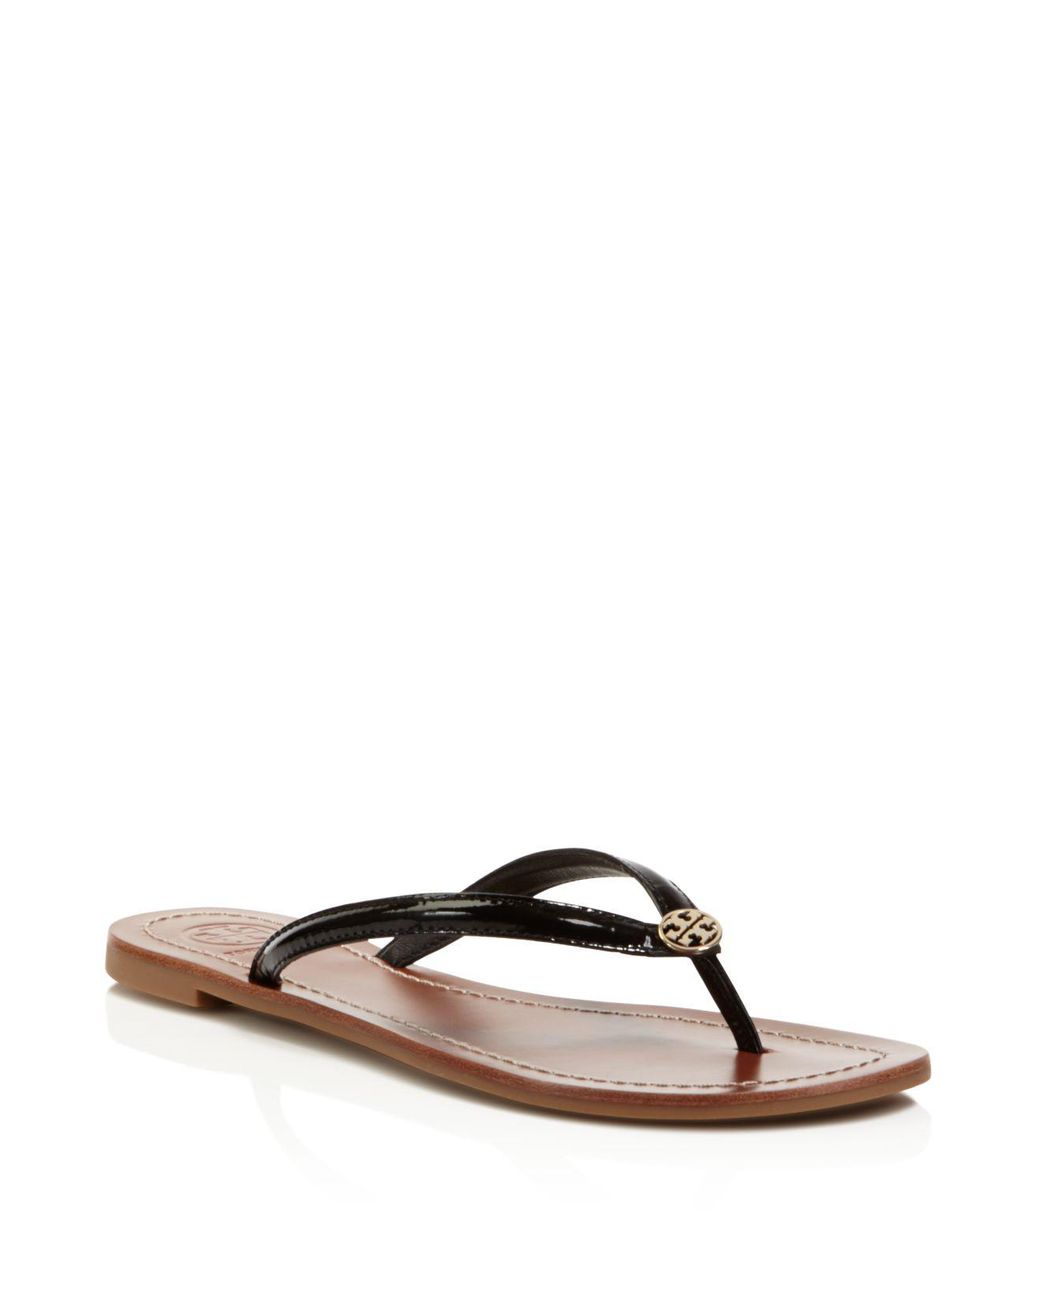 Tory Burch Terra Thong Patent Leather Flip-flop Sandals in Black | Lyst